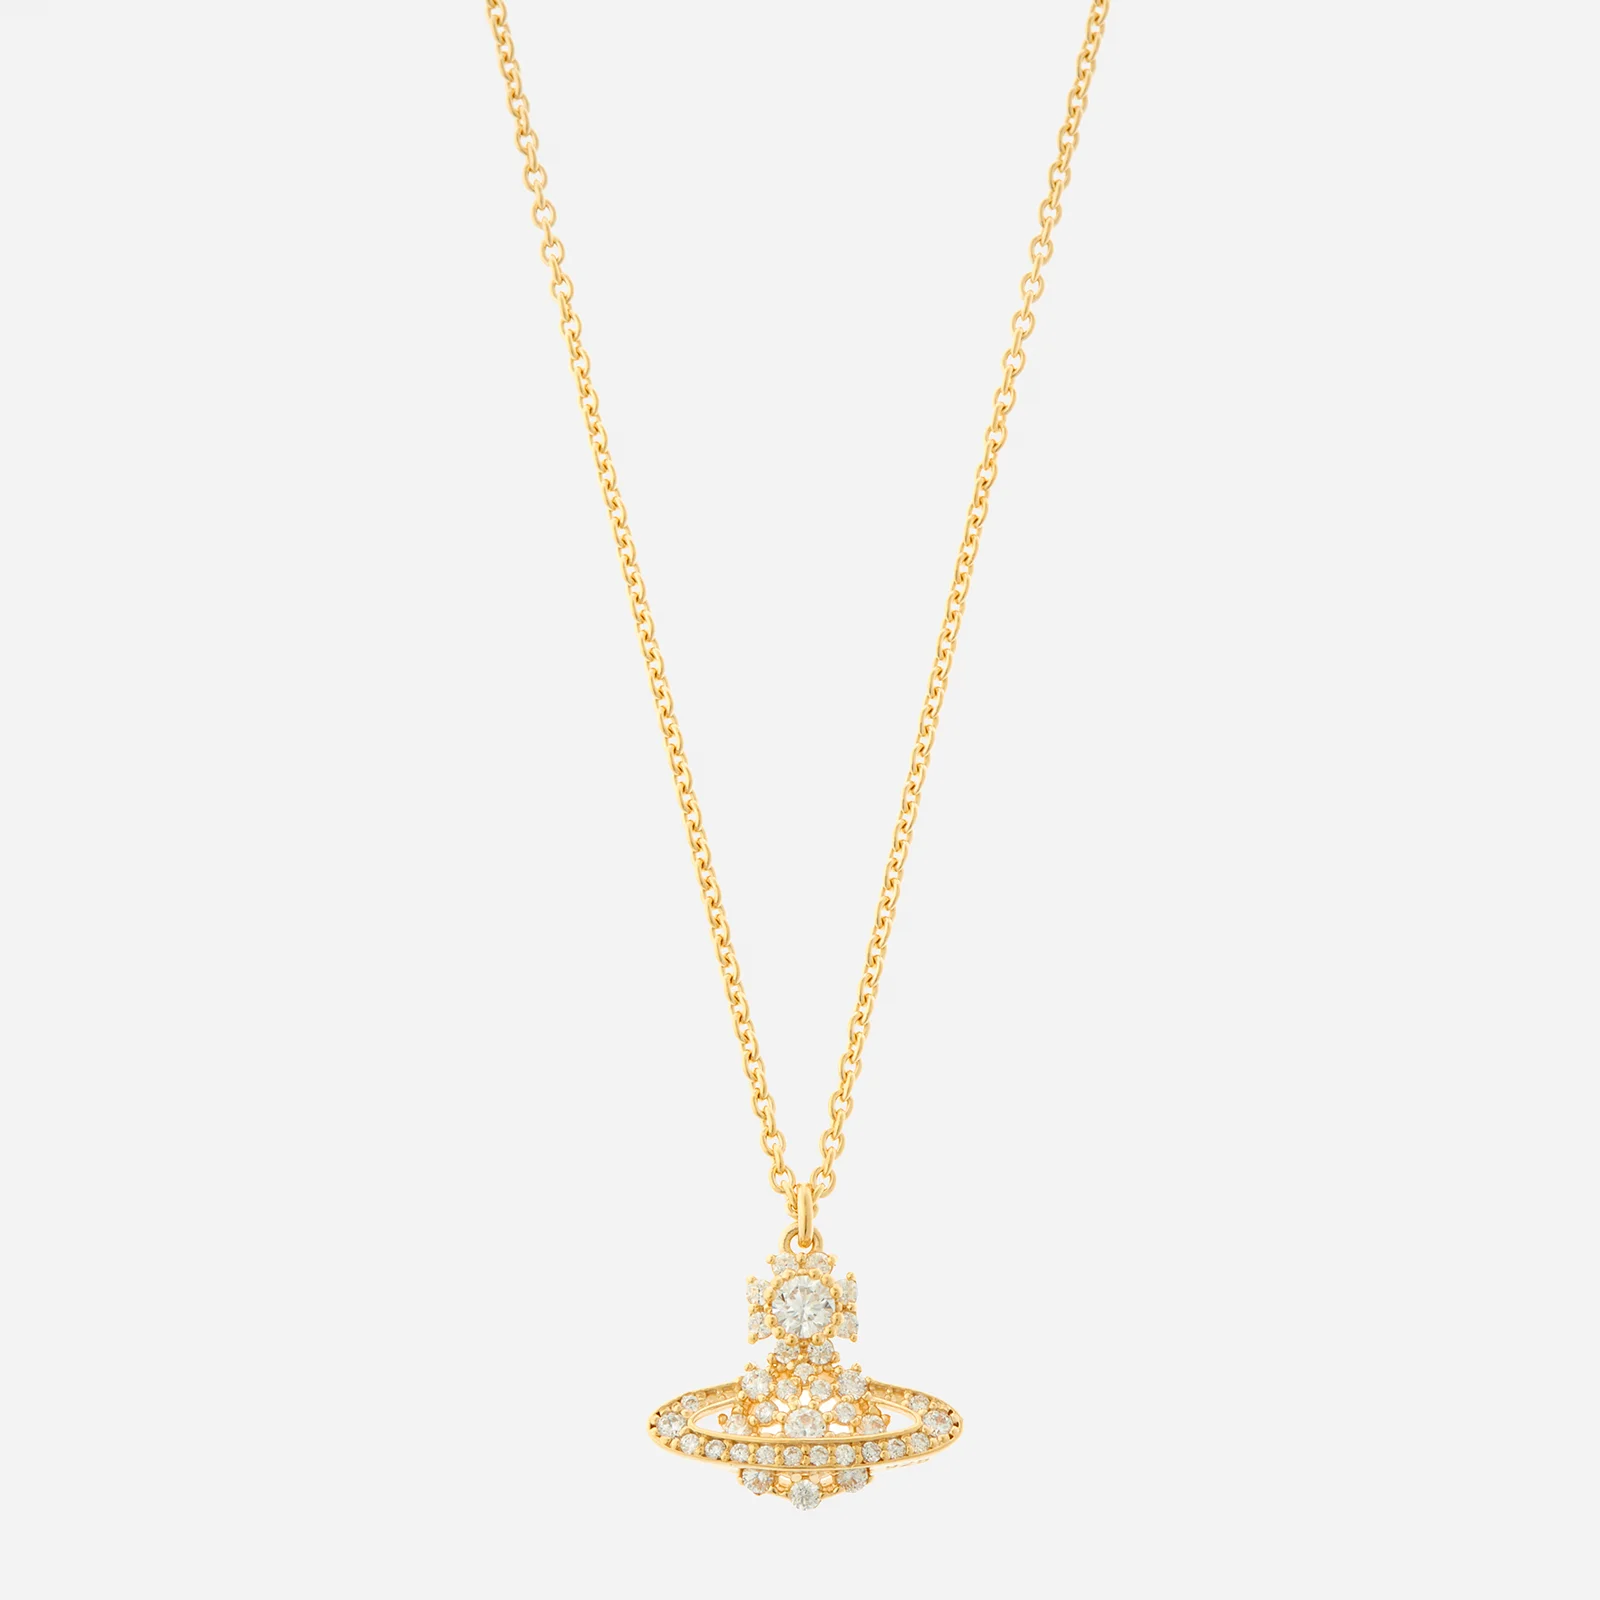 Vivienne Westwood Narcissa Gold-Tone Sterling Silver and Crystal Necklace Image 1